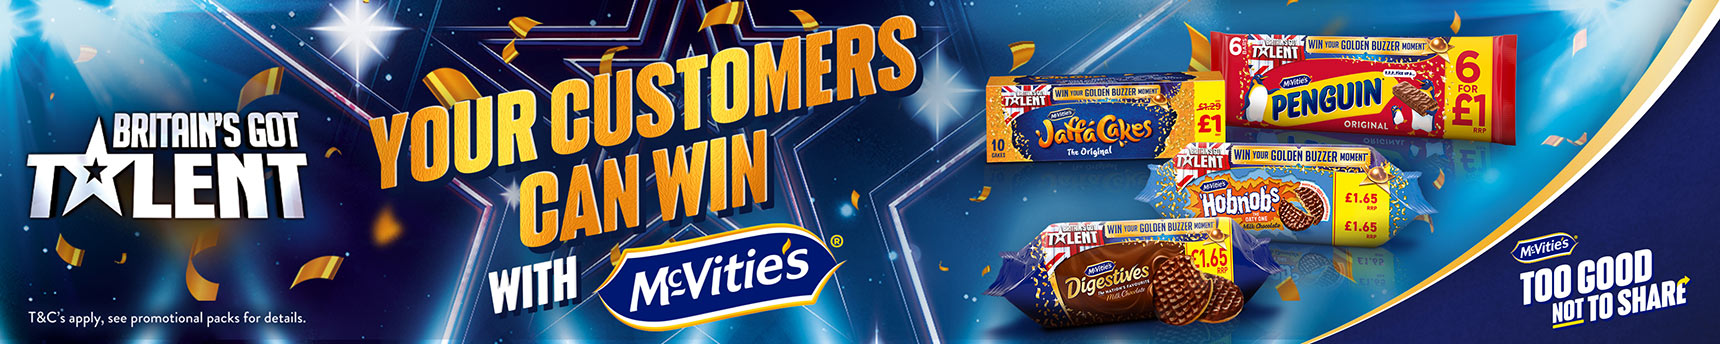 Britain's Got Talent - Your customers can win with McVities